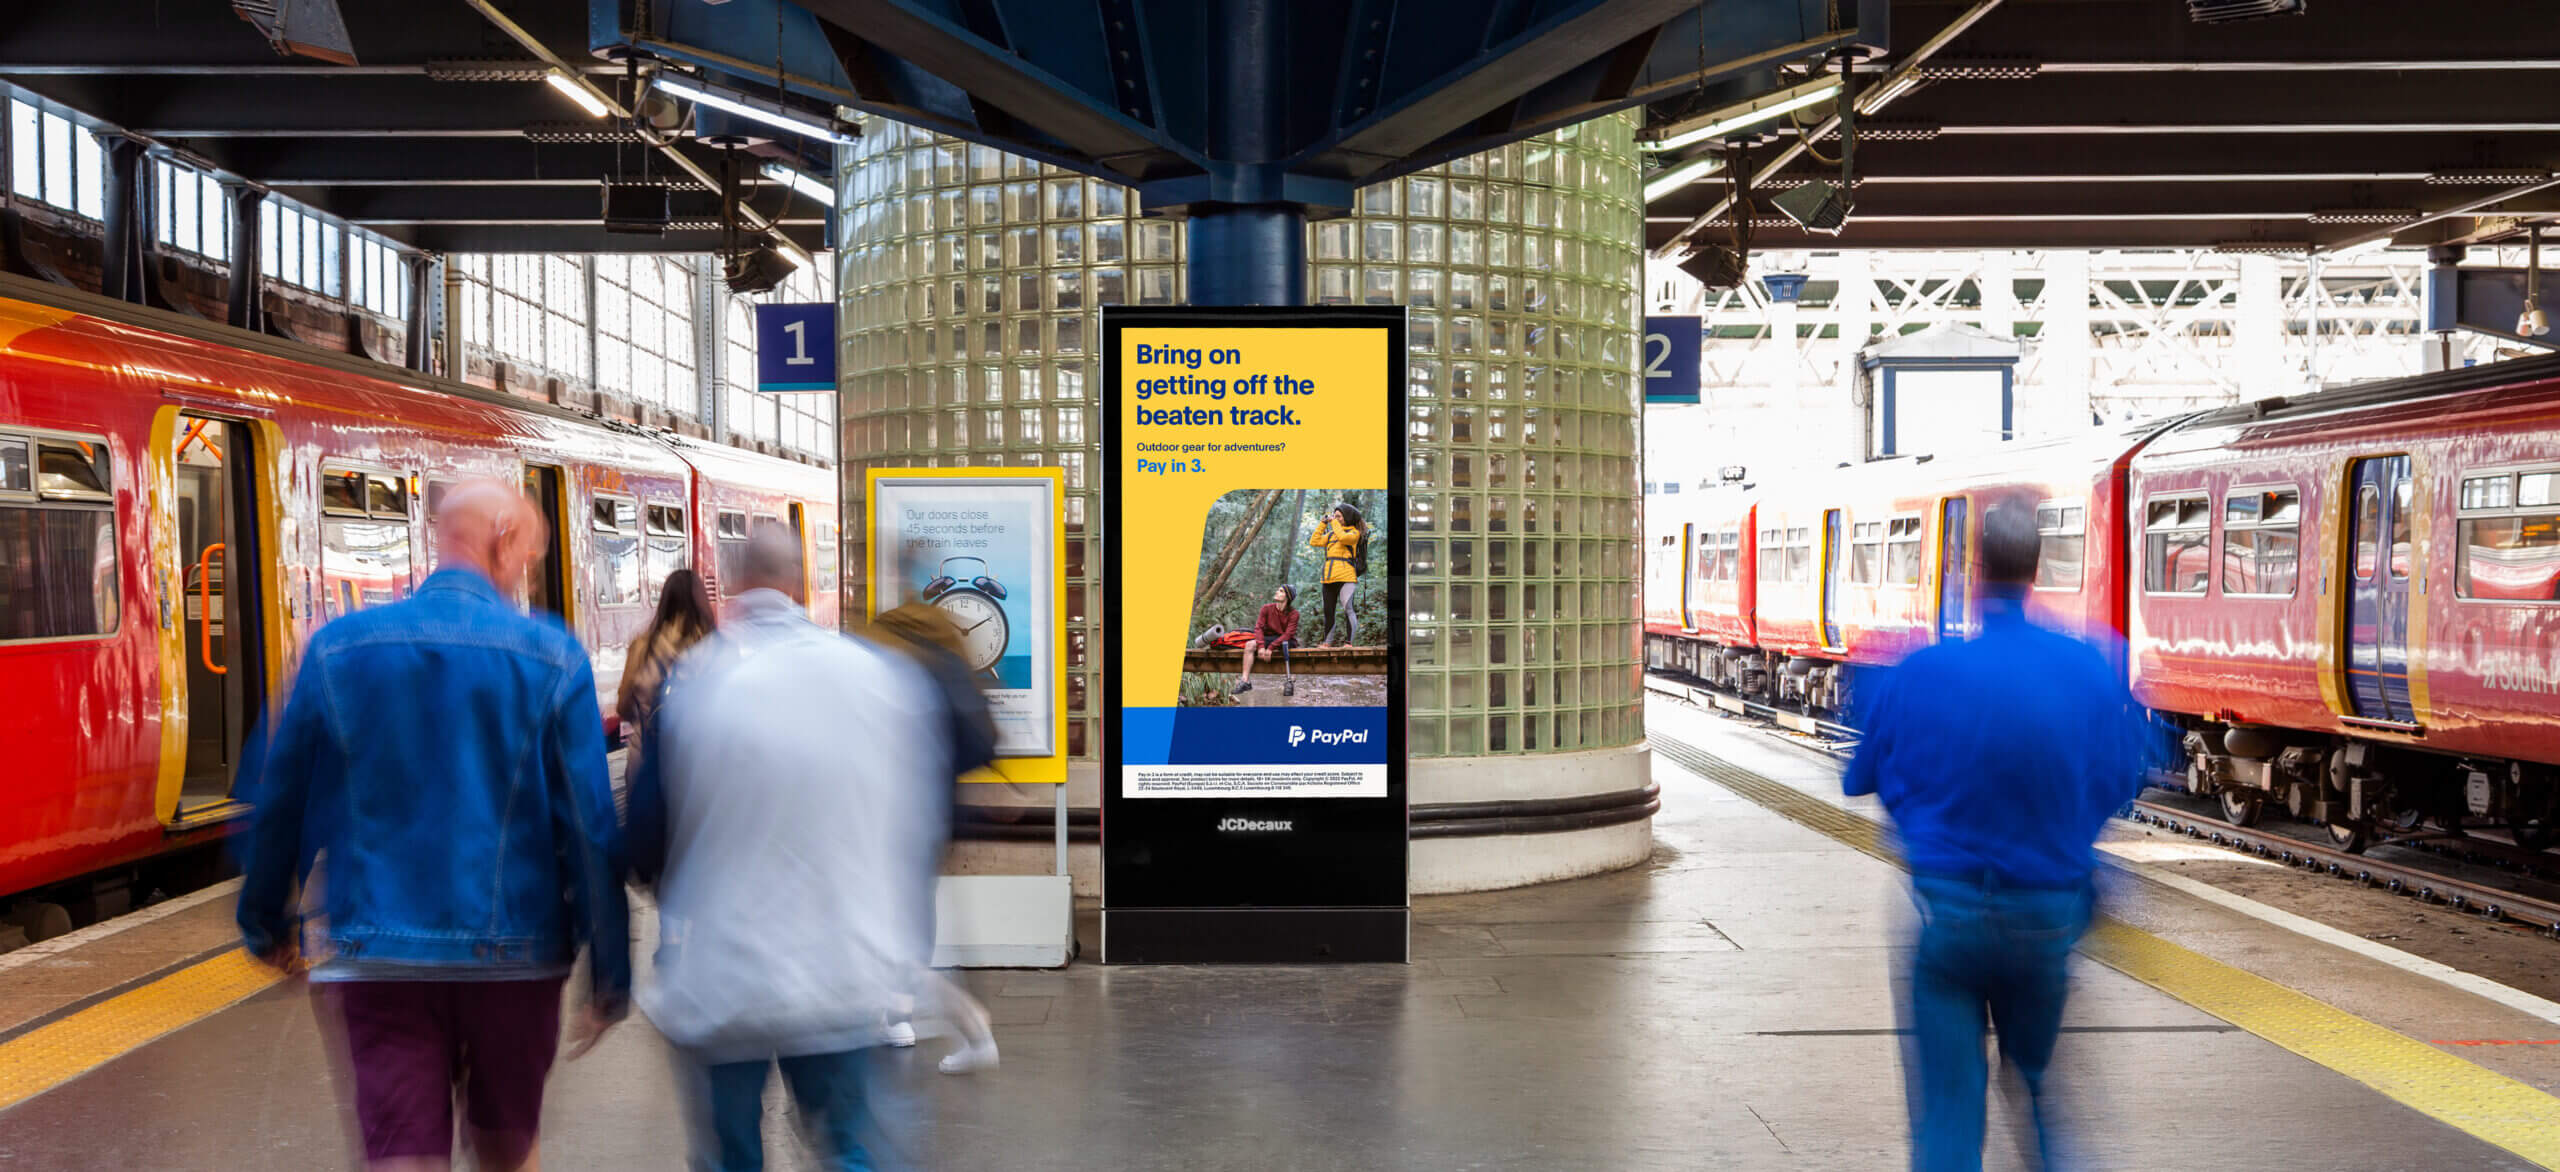 PayPal's pay in 3 campaign on a station platform.